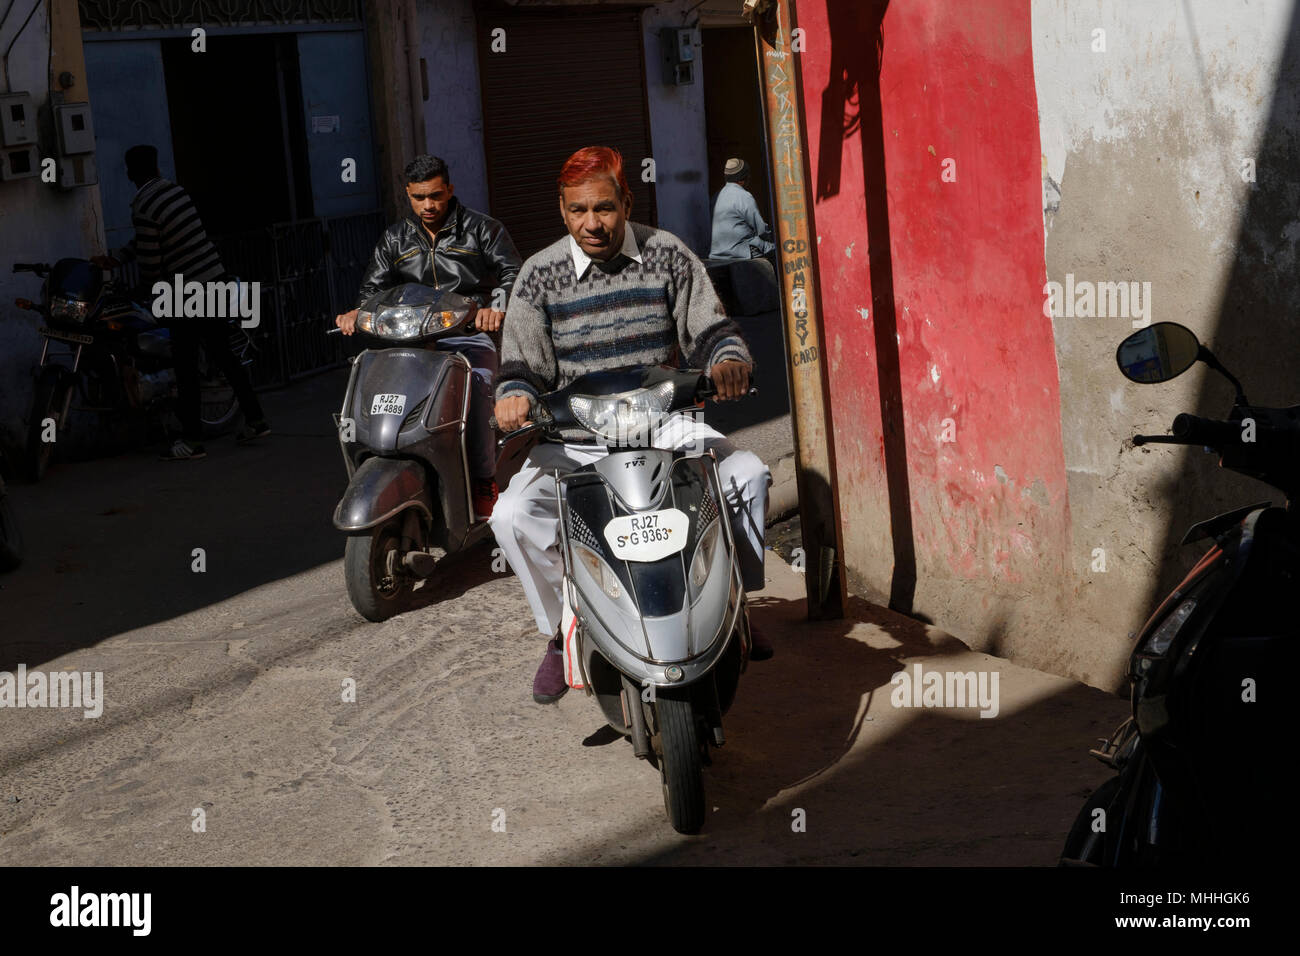 Man with red hair on a motorbike passing a red wall.. Udaipur, also known as the City of Lakes, The Venice of the East, is the historic capital of the kingdom of Mewar, Rajasthan. Stock Photo